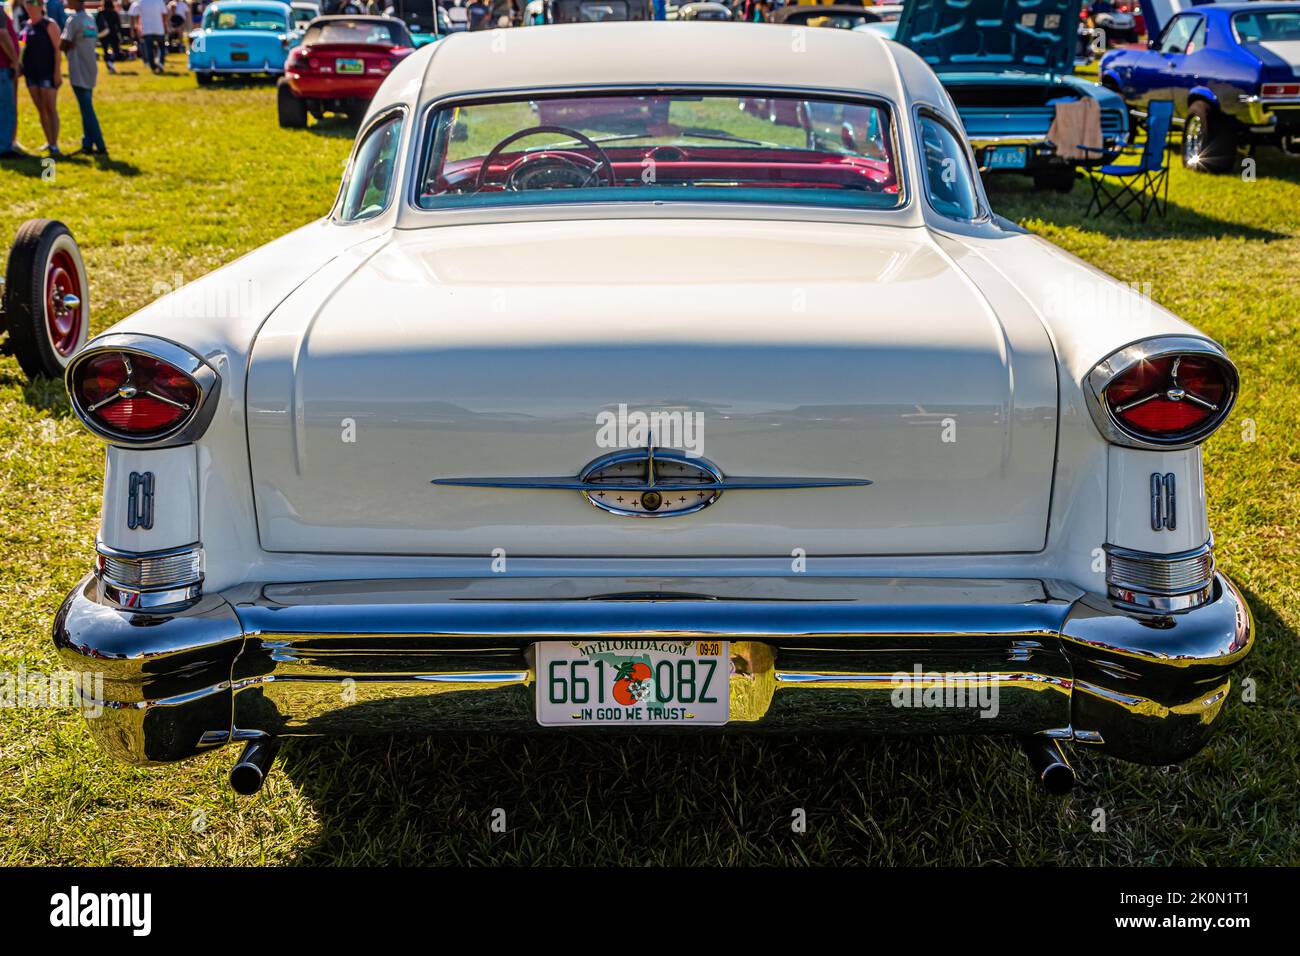 Daytona Beach, FL - November 24, 2018: High perspective rear view of a 1957 Oldsmobile Golden Rocket 88 Holiday Hardtop Coupe at a local car show. Stock Photo